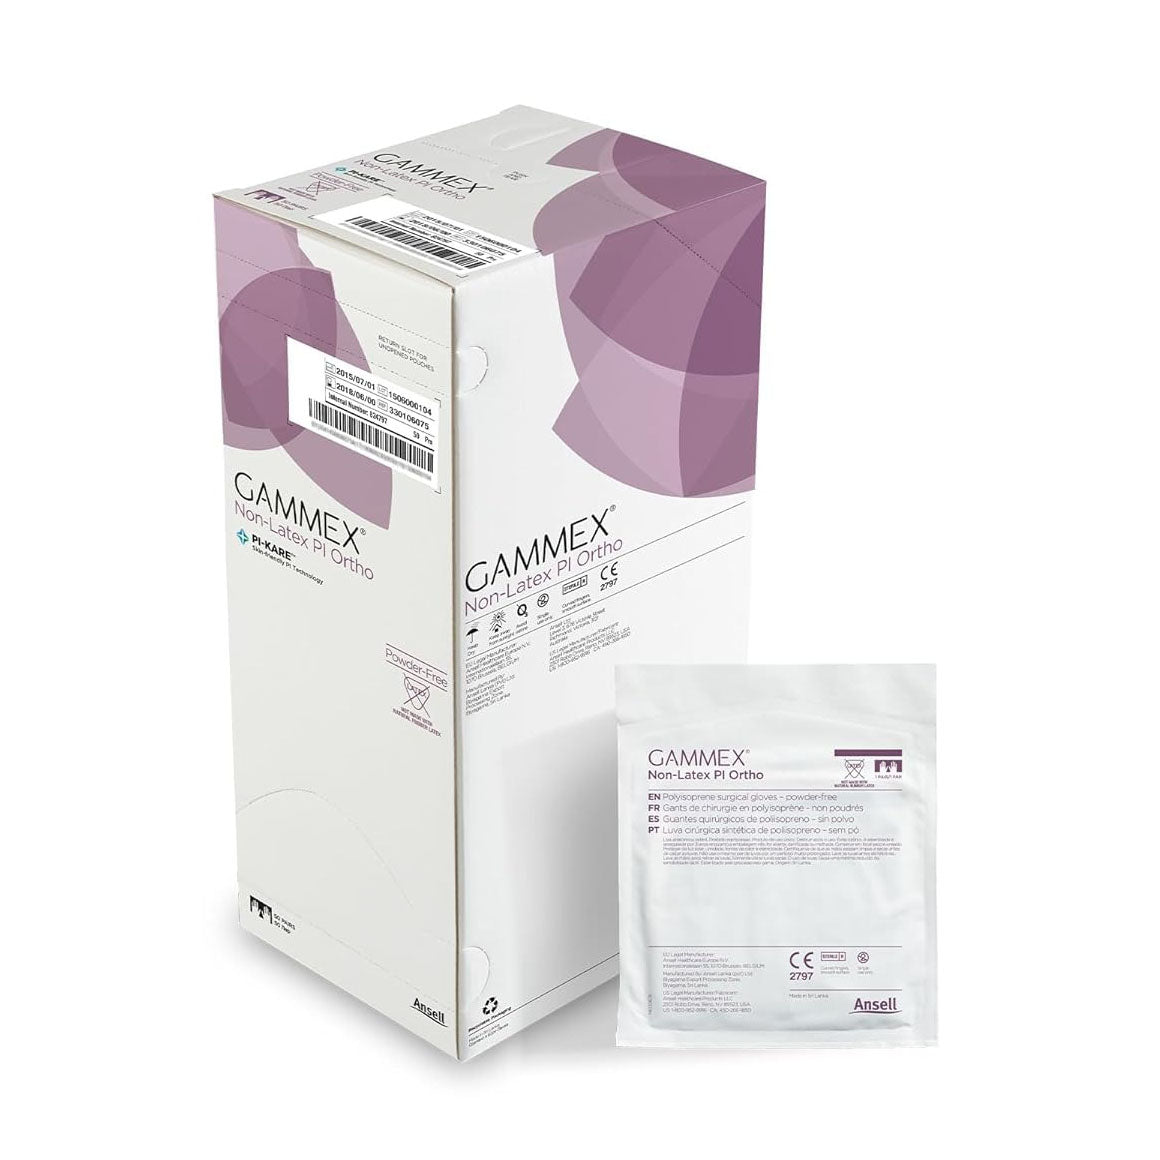 a box and a packet of Ansell Gammex Non-Latex PI Ortho sterile gloves